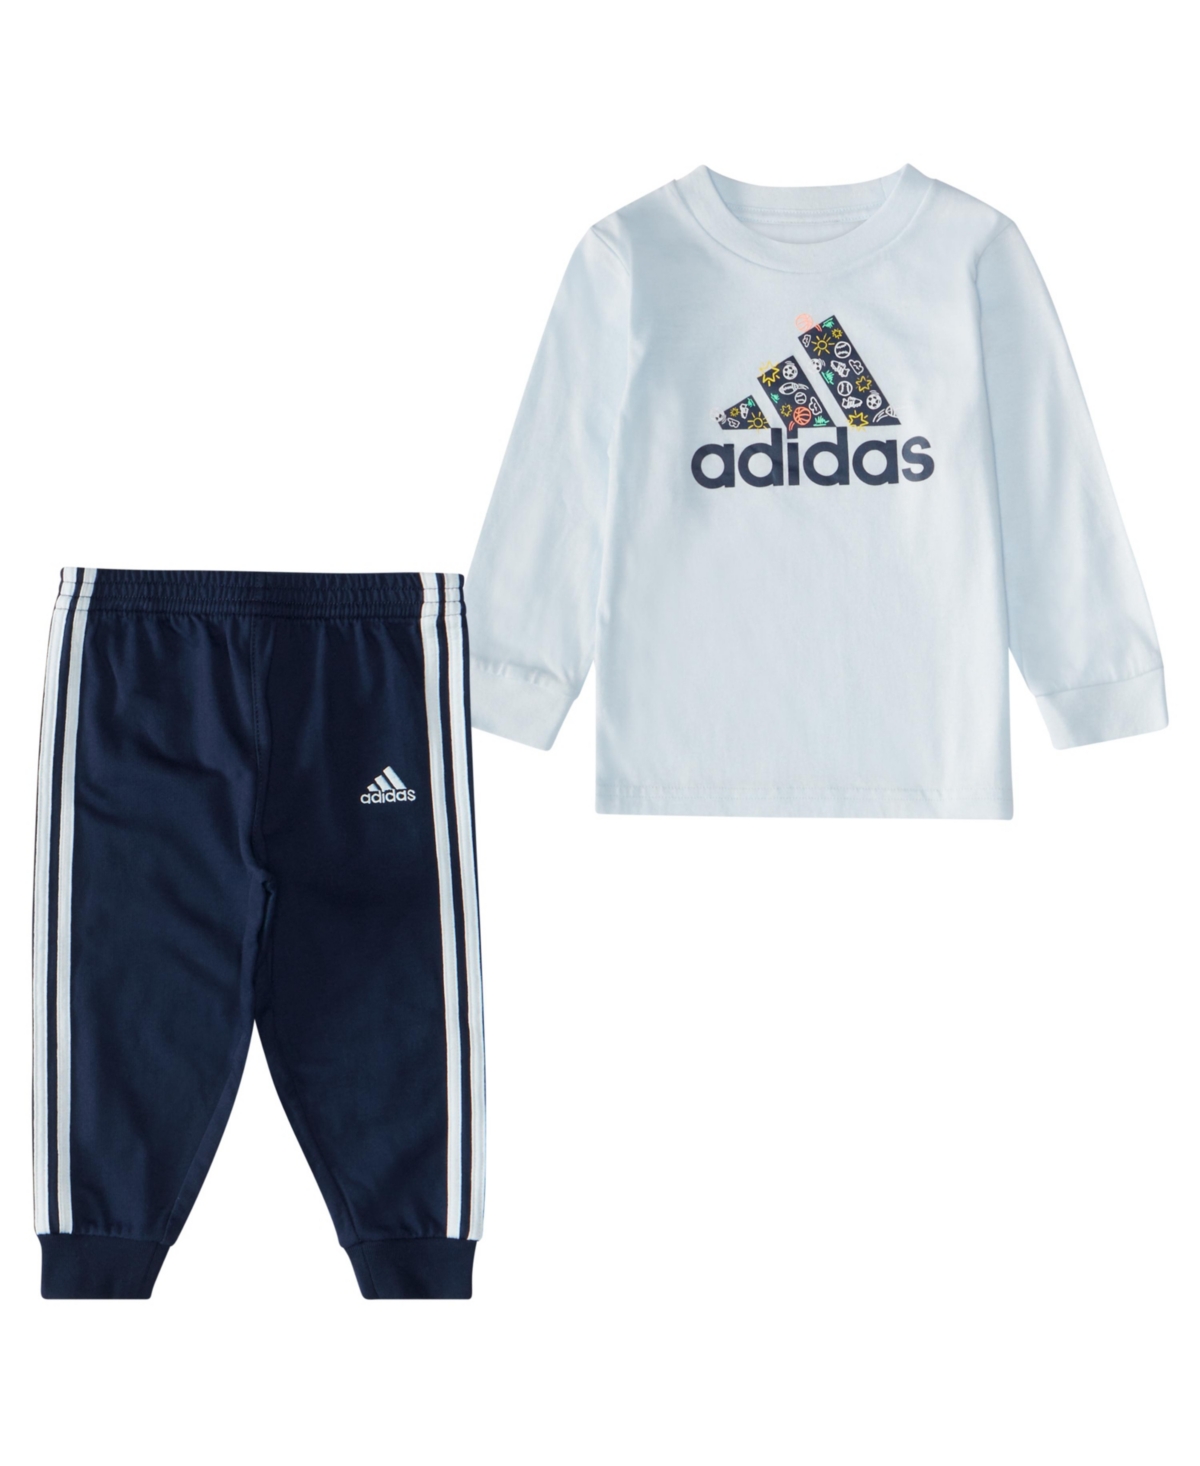 adidas Baby Boys Cotton T-Shirt and Joggers, 2 Piece Set